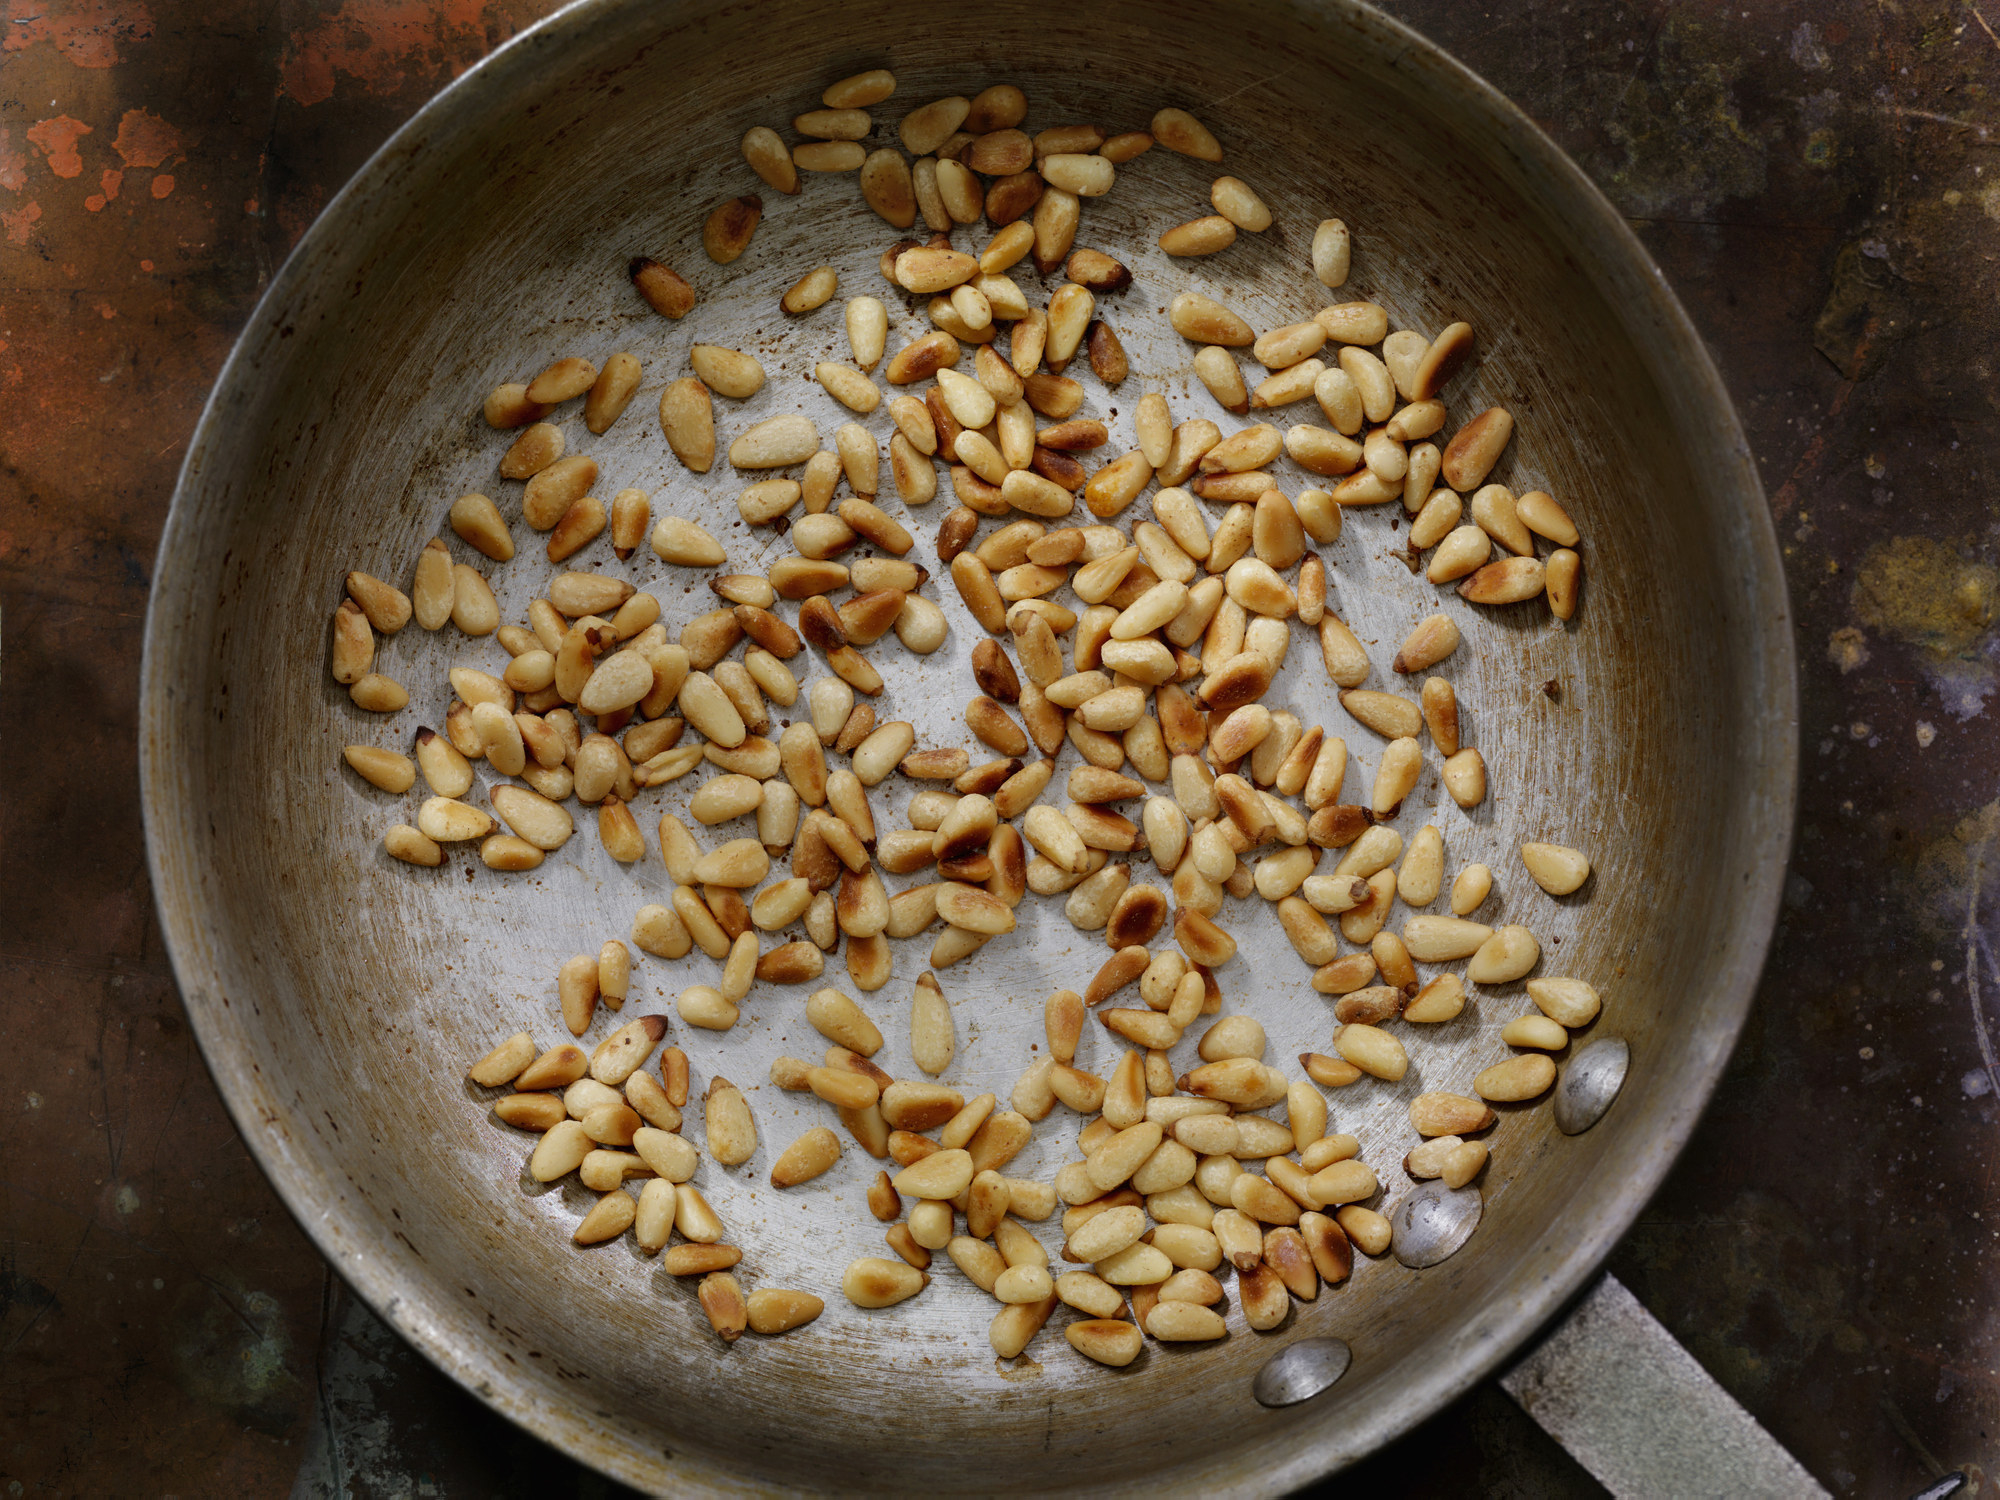 Toasted pine nuts in a skillet